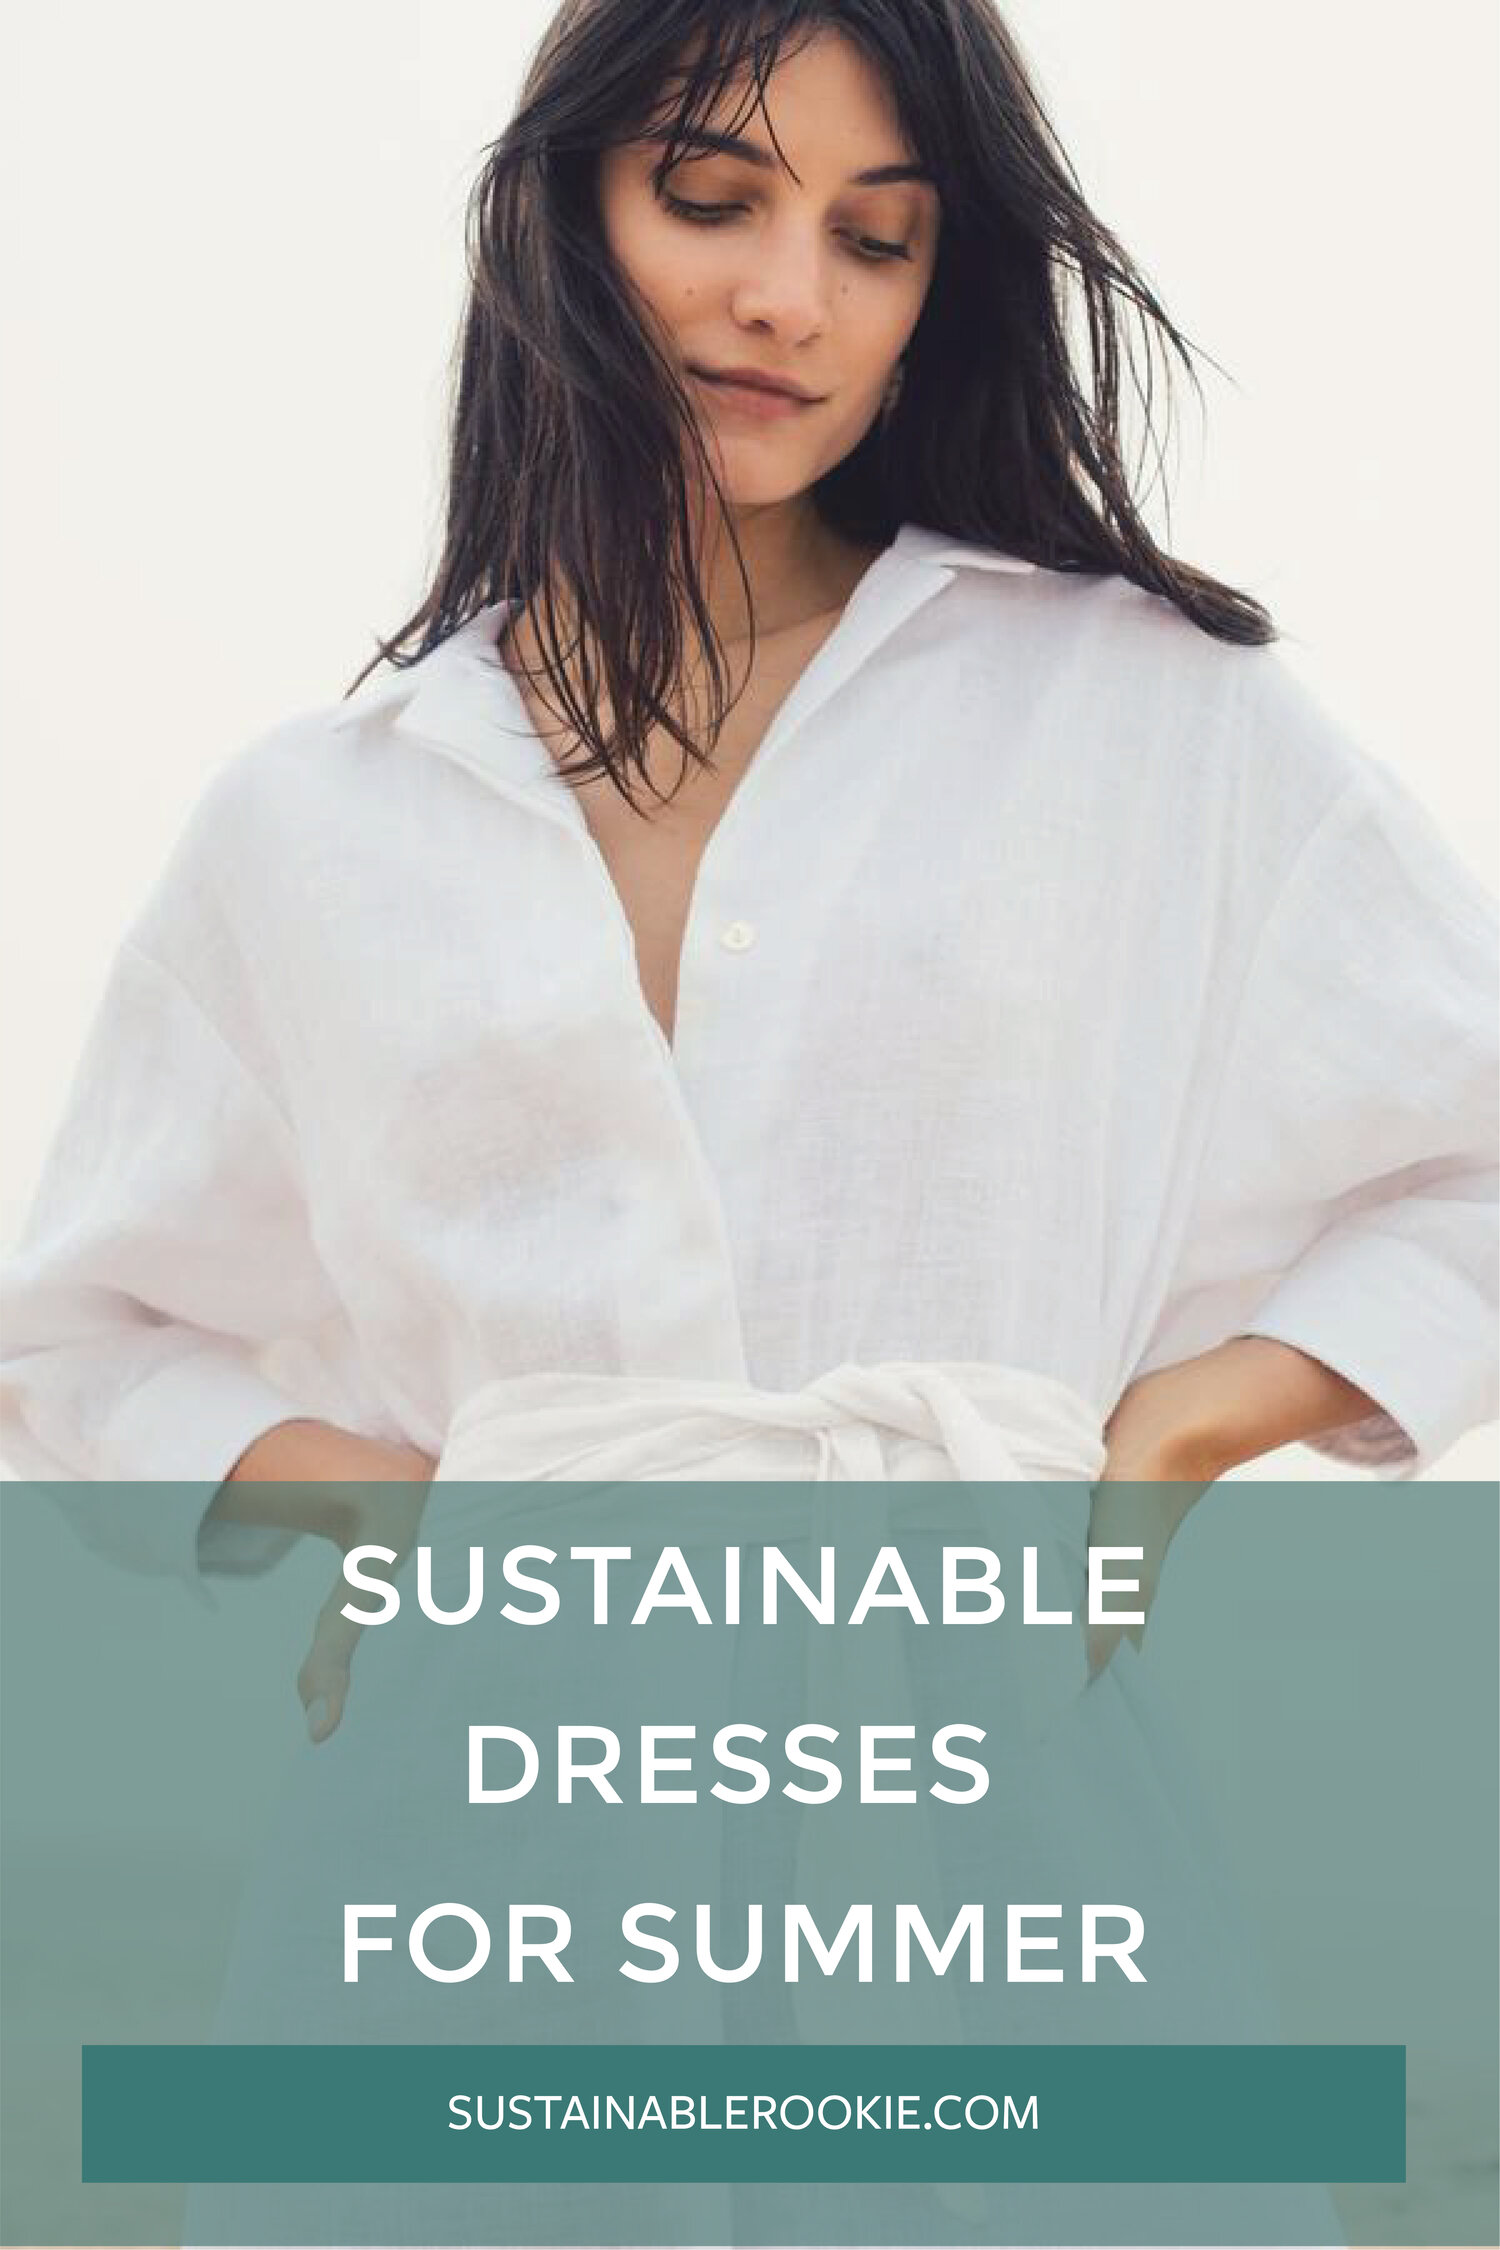 10 Sustainable and Eco-Friendly Dresses for Summer — Sustainable Rookie